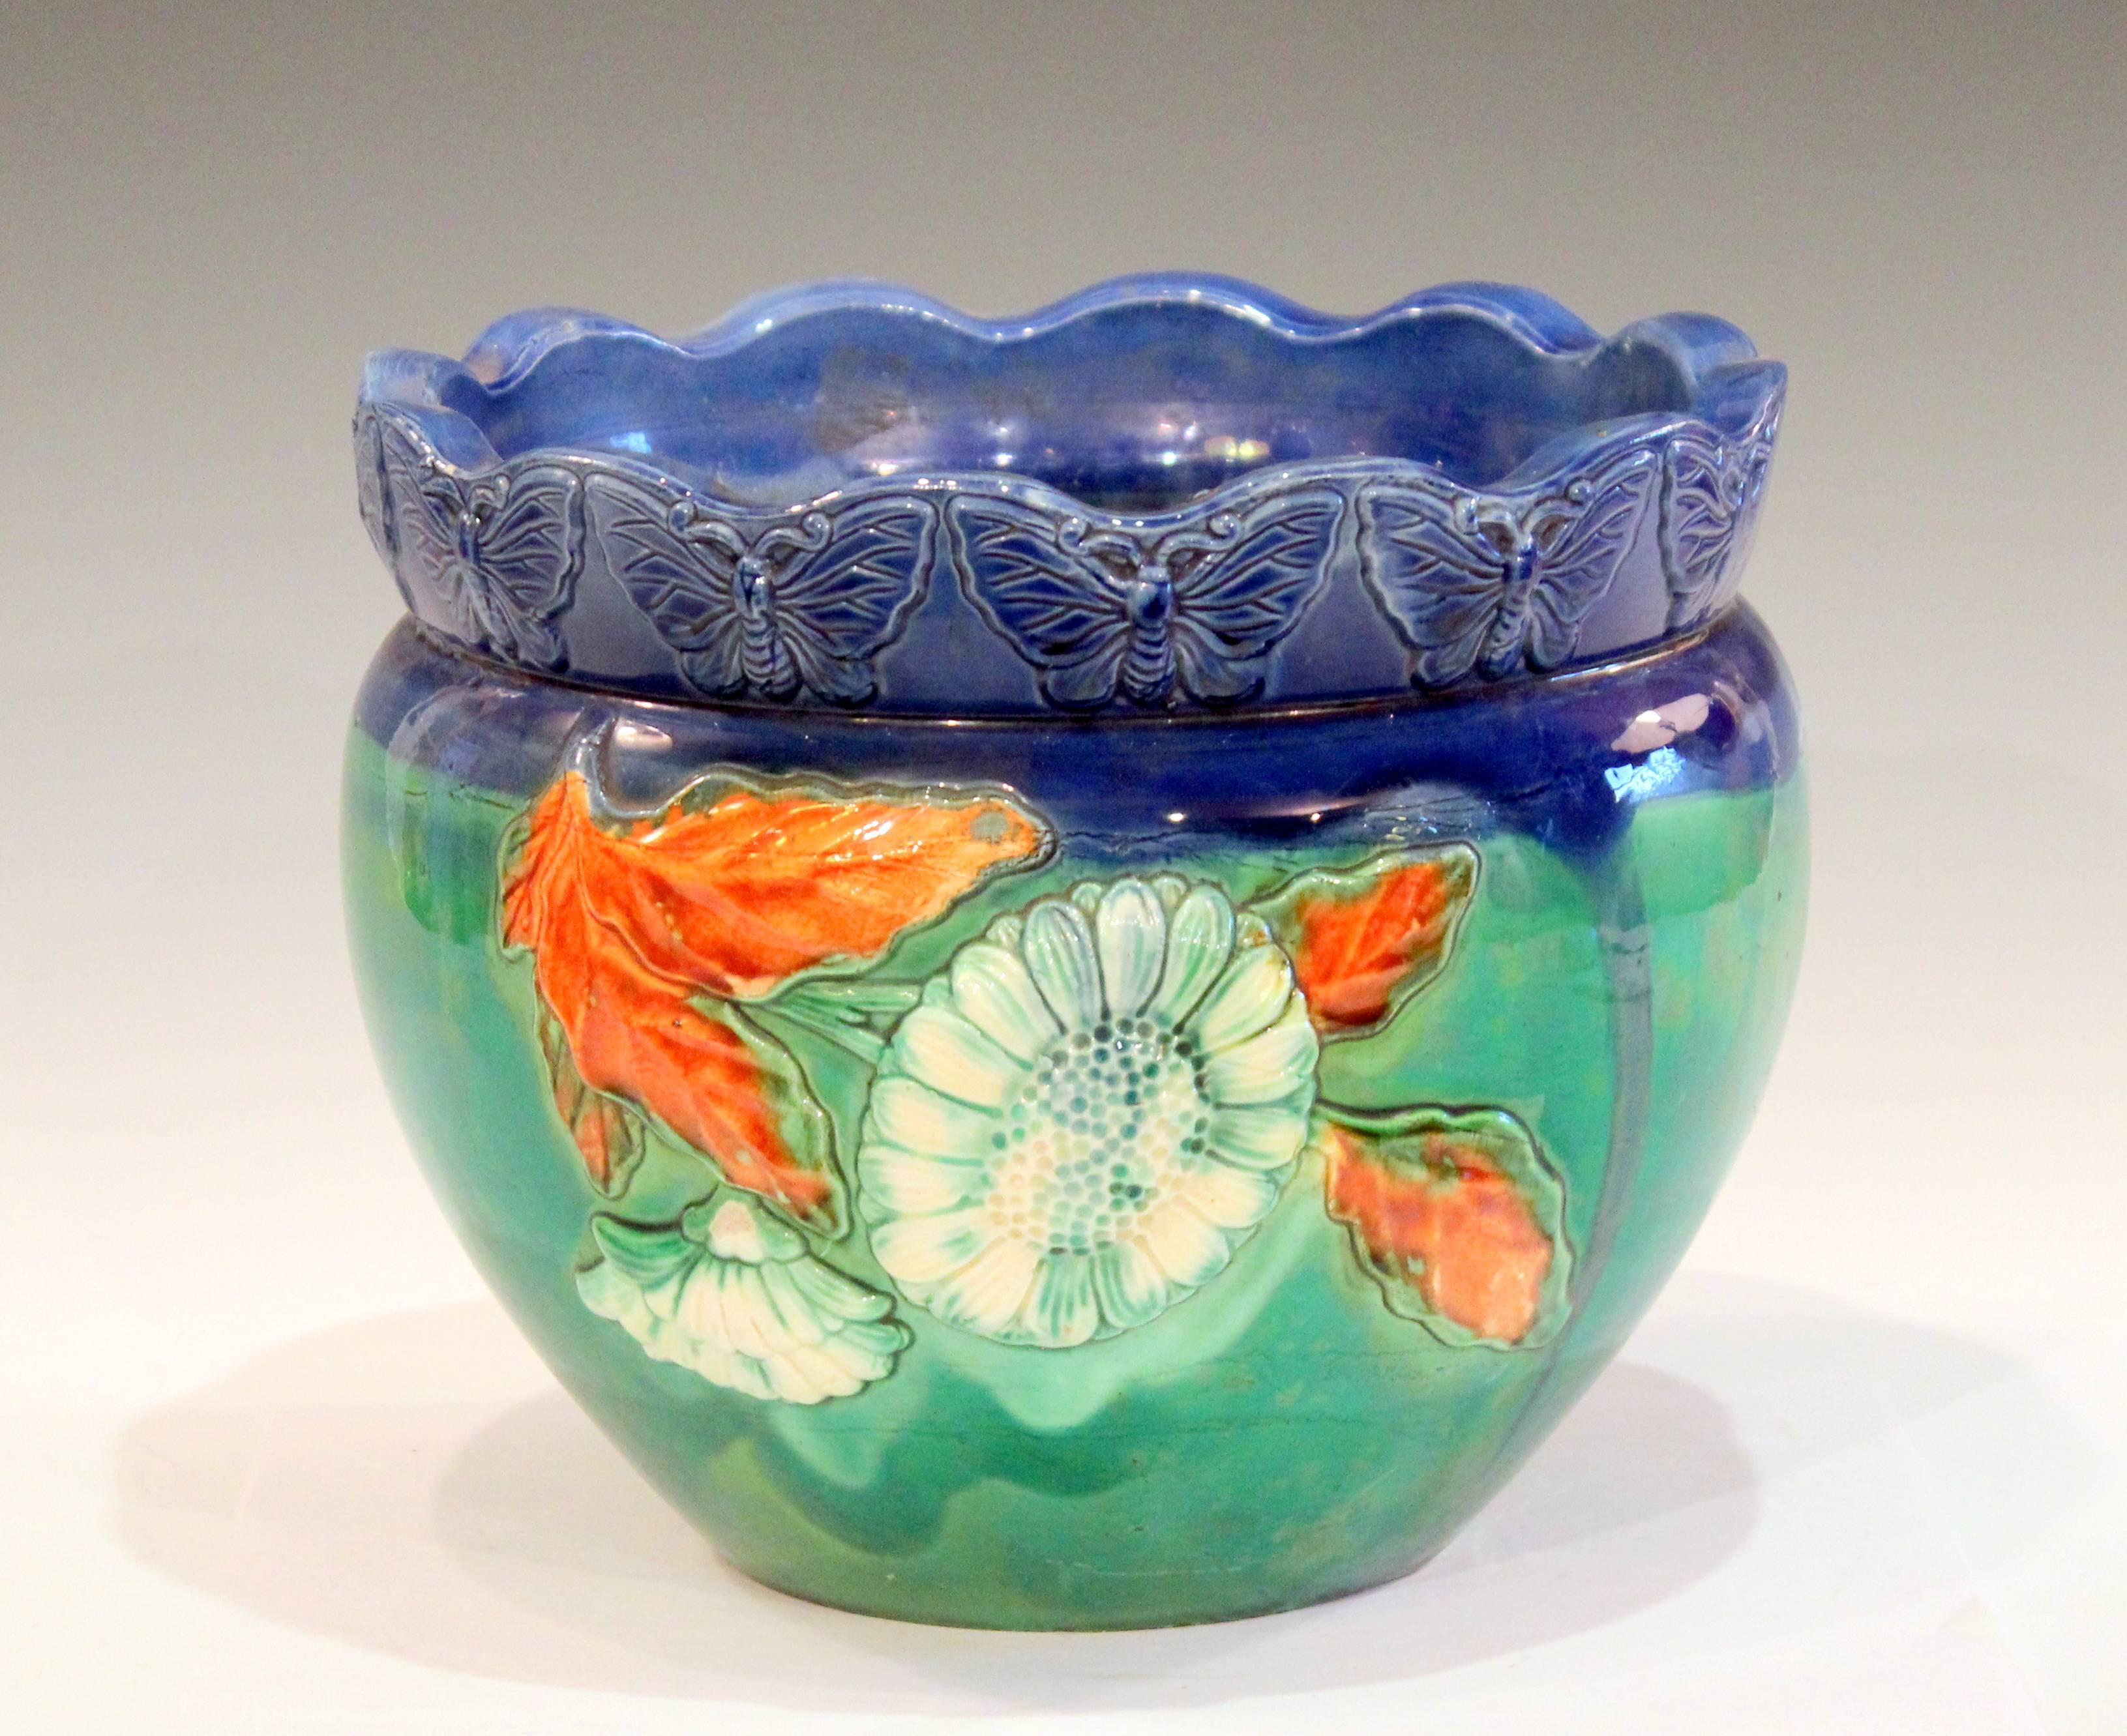 Vintage, handmade Awaji Pottery jardiniere with applied decoration of blooming flowers and a band of butterflies at the rim, circa 1930. Glazed in vibrant green, blue, and orange. Impressed marks. 7